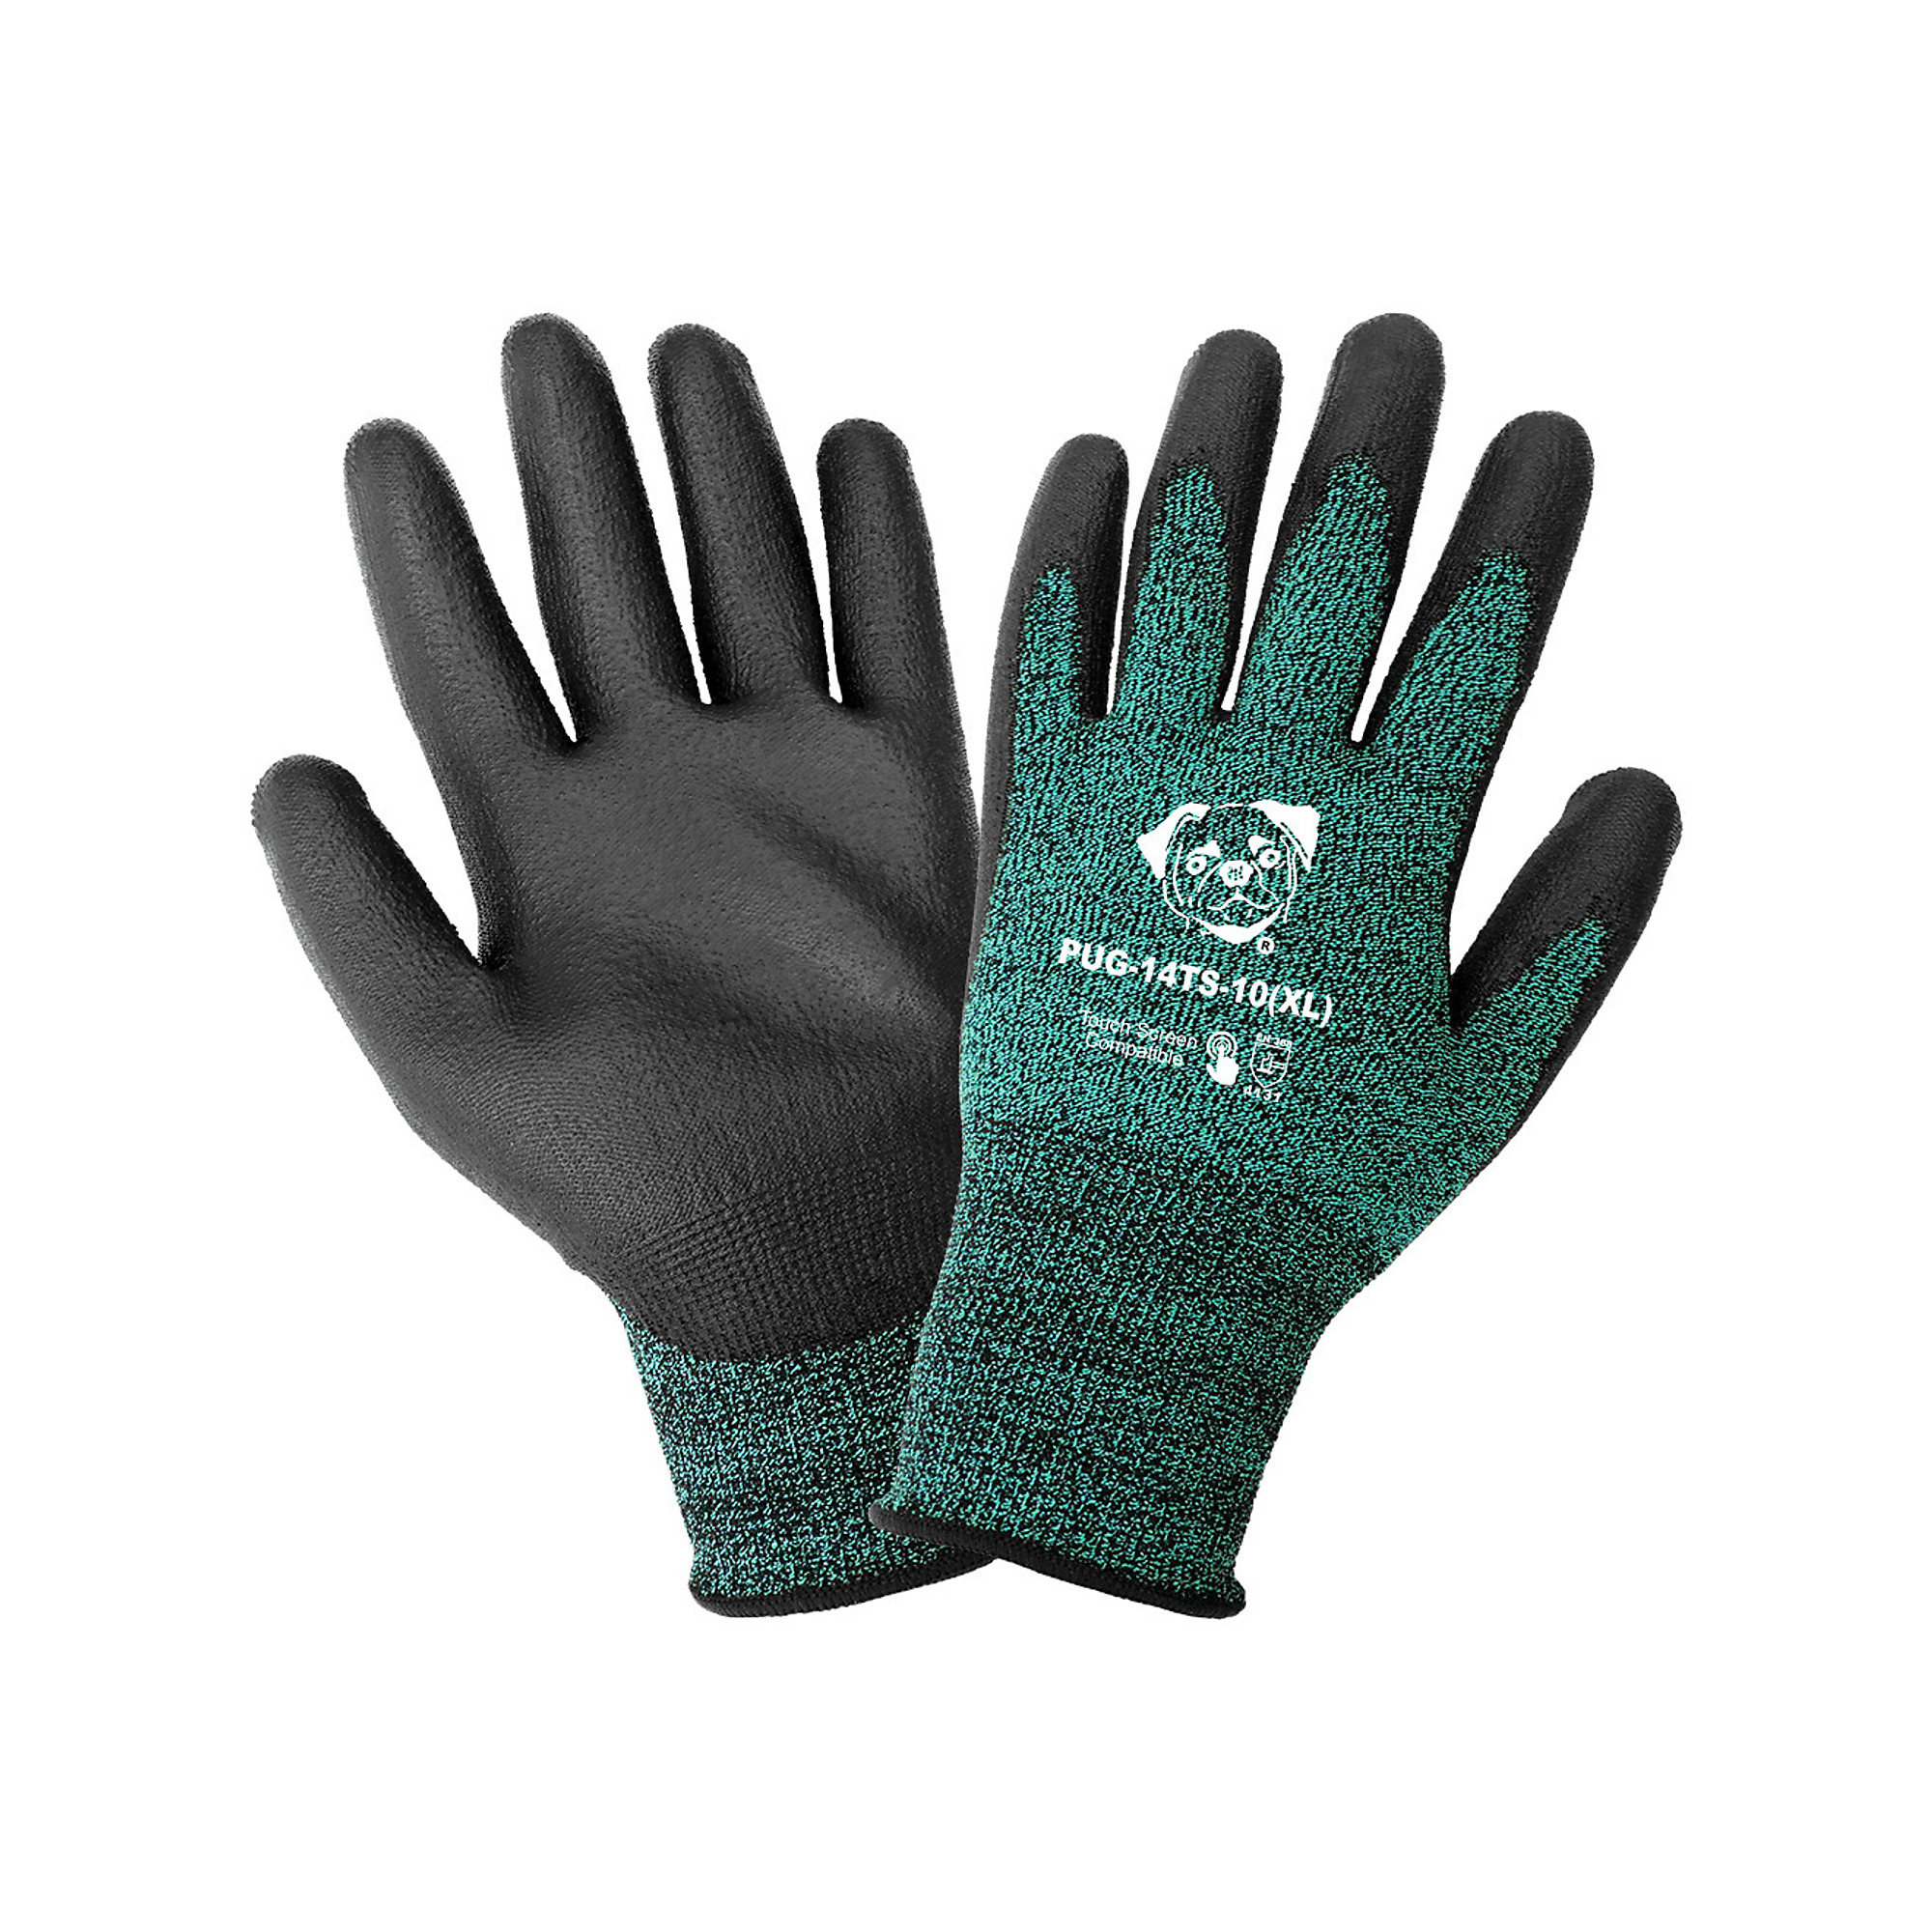 Global Glove PUG , Green, Poly Coated, Cut Resis A1 Tch Scrn Gloves - 12 Pairs, Size XL, Color Green/Black, Included (qty.) 12 Model PUG-14TS-10(XL)